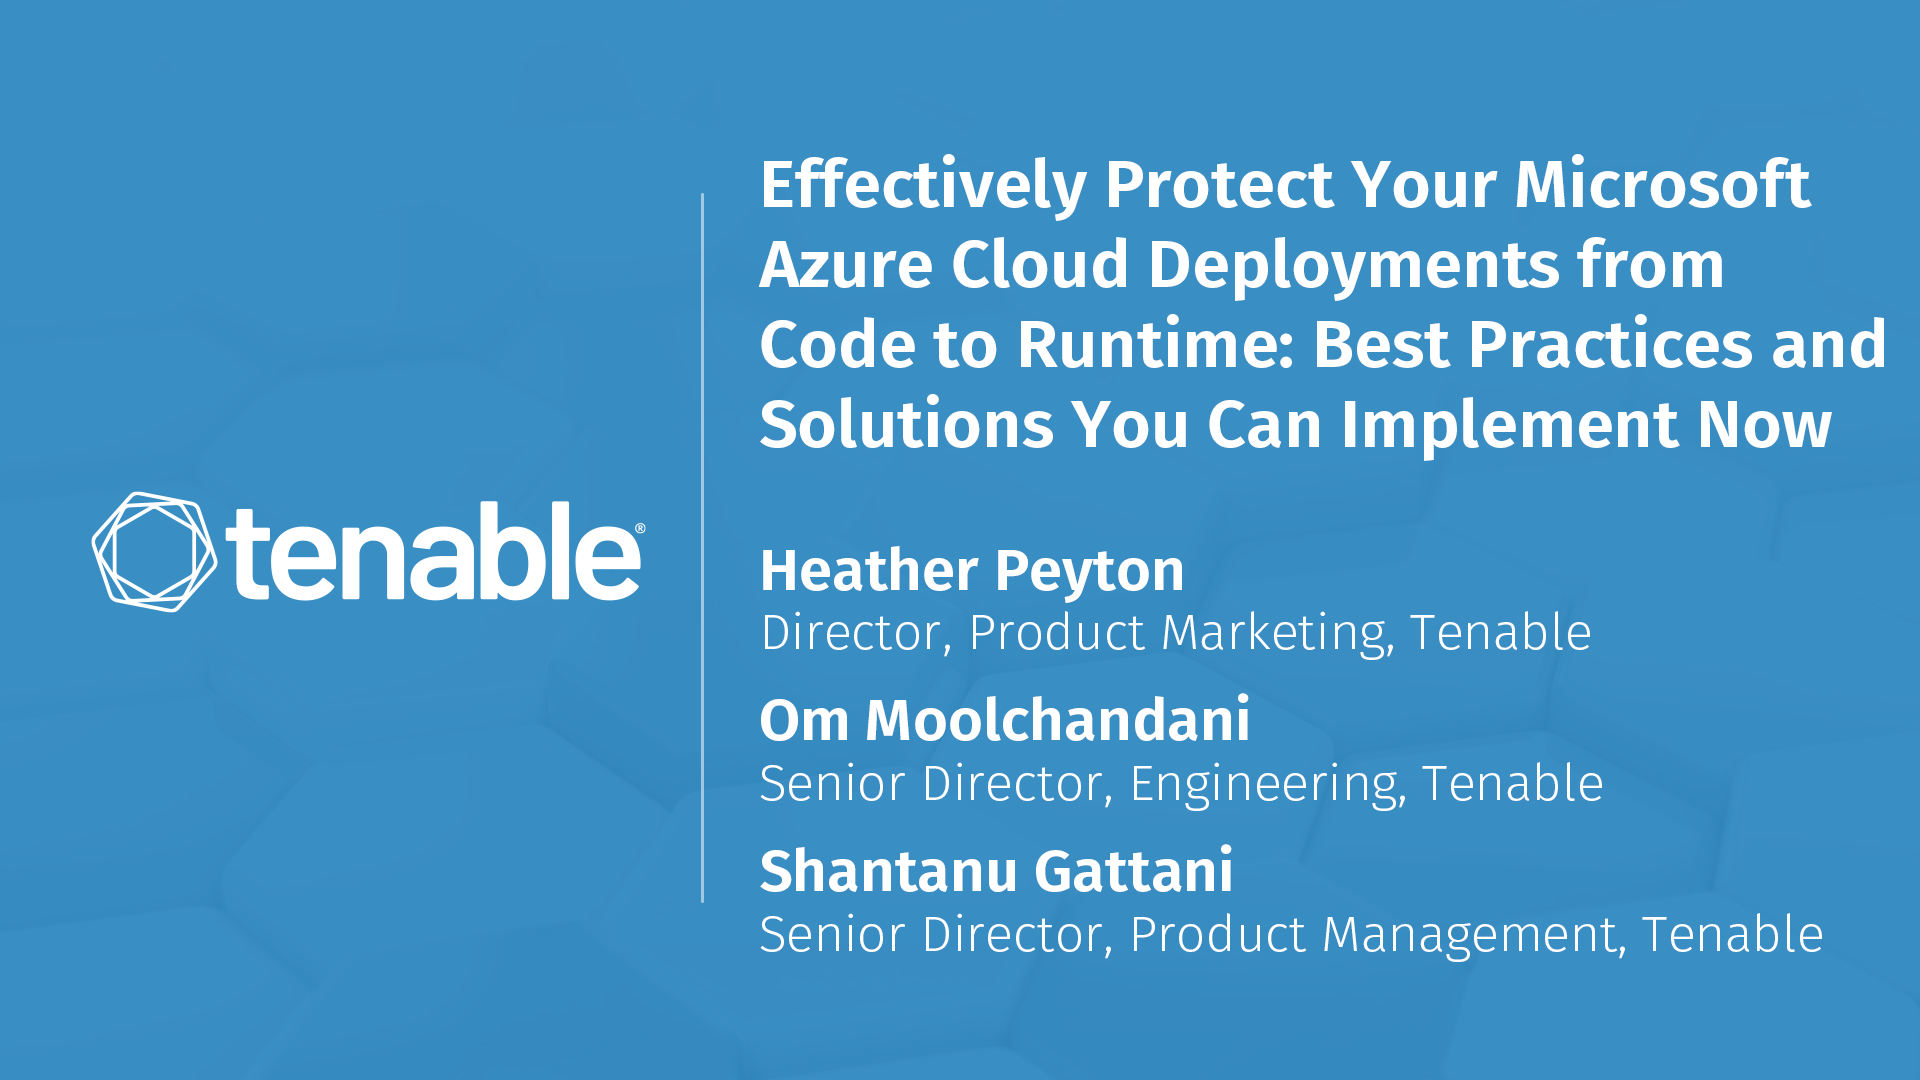 Effectively Protect Your Microsoft Azure Cloud Deployments from Code to Runtime